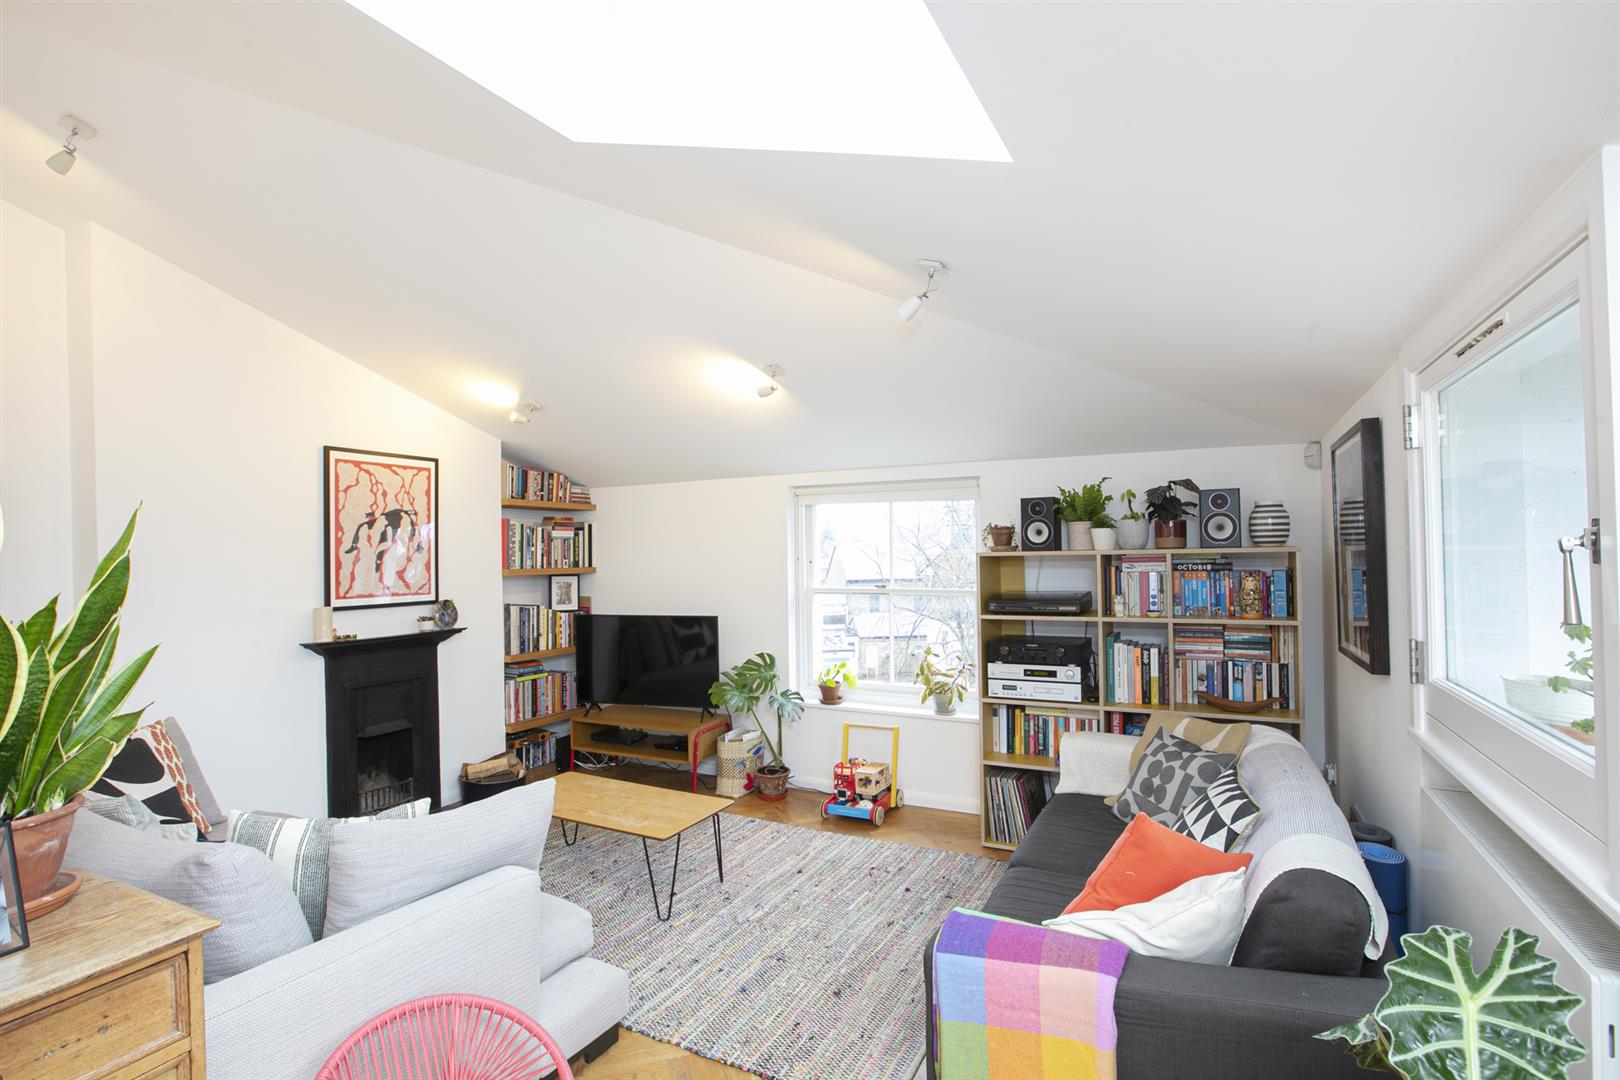 Flat - Conversion Under Offer in Holly Grove, Peckham, SE15 893 view7